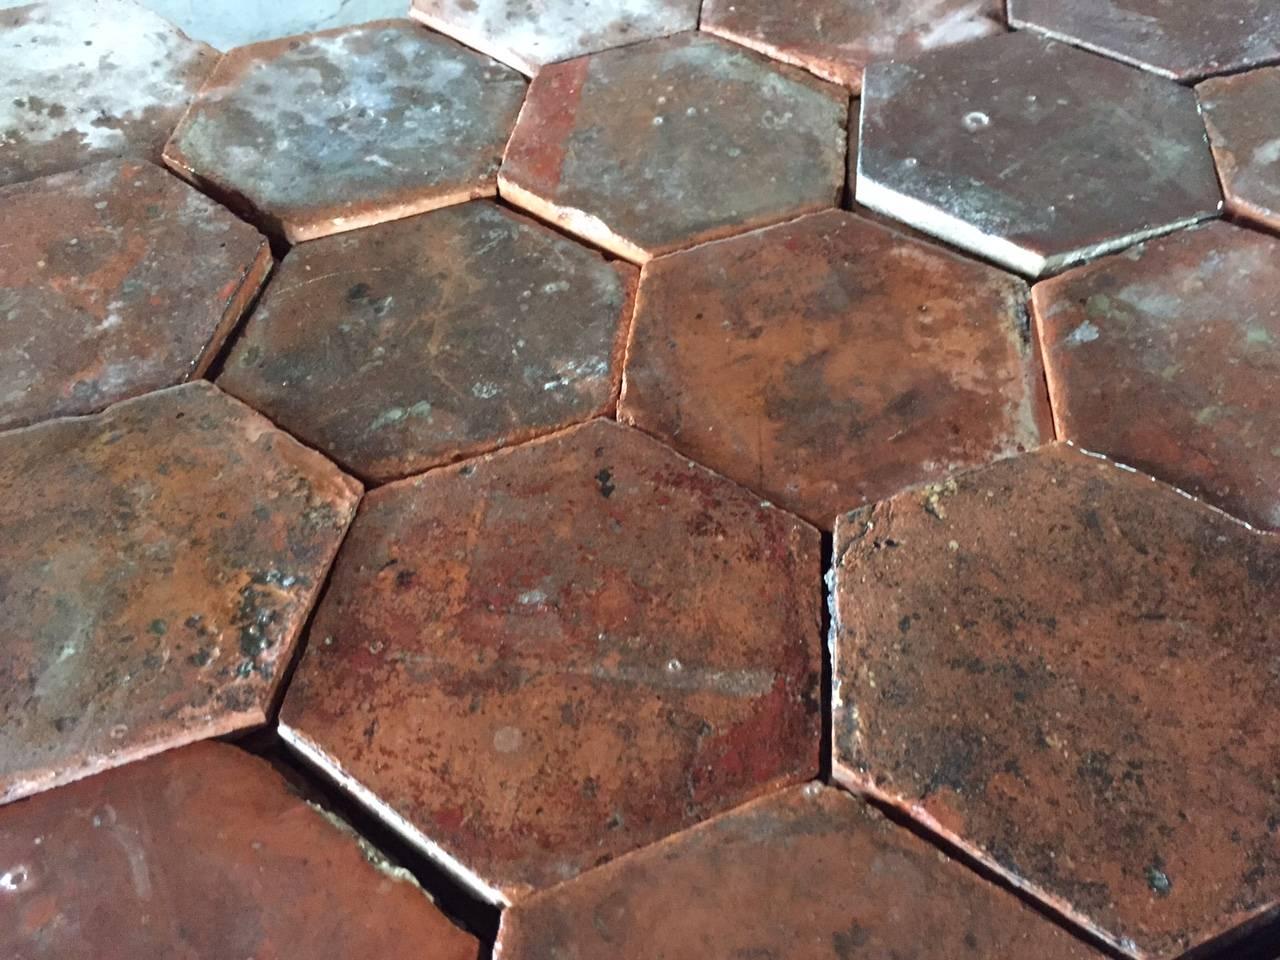 Original French antique hexagonal terra cotta flooring.
handmade, hand-finish from the 18th century, reclaimed from old and aged properties.
Original patina and finished, each antique tile has been hand-select and cleaned to be ready for